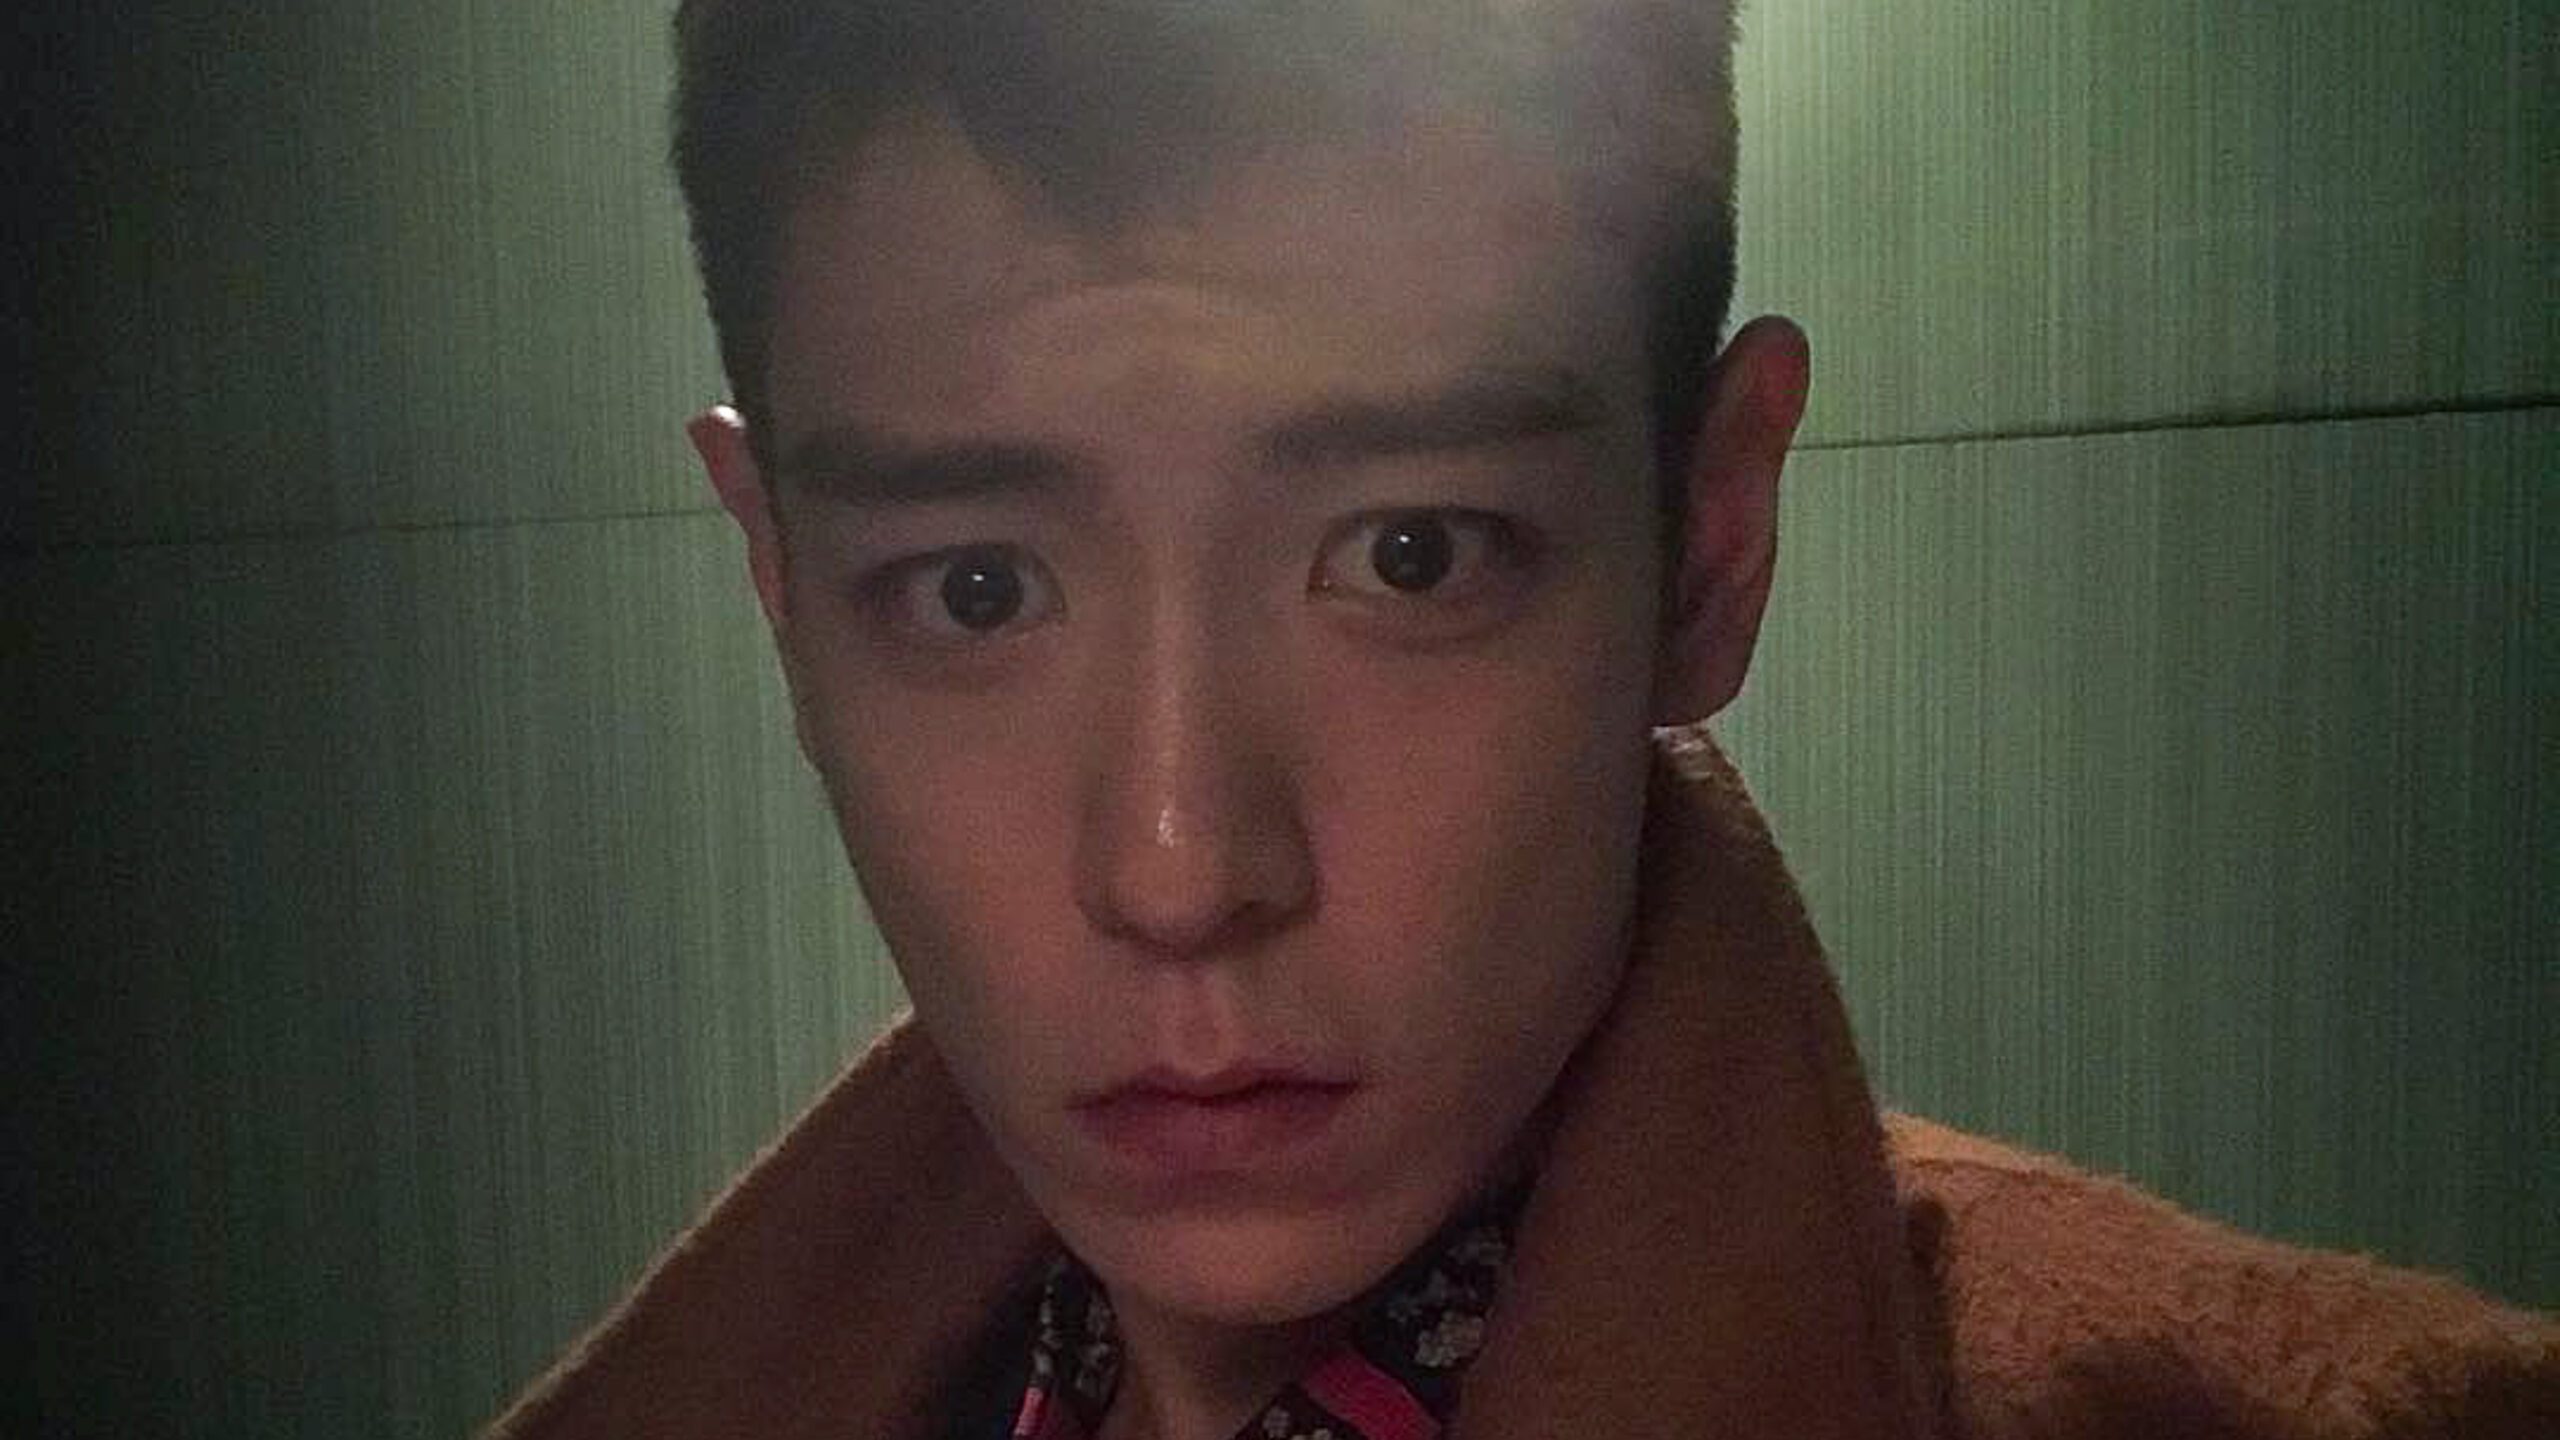 Big Bang’s T.O.P. is found unconscious, rushed to hospital